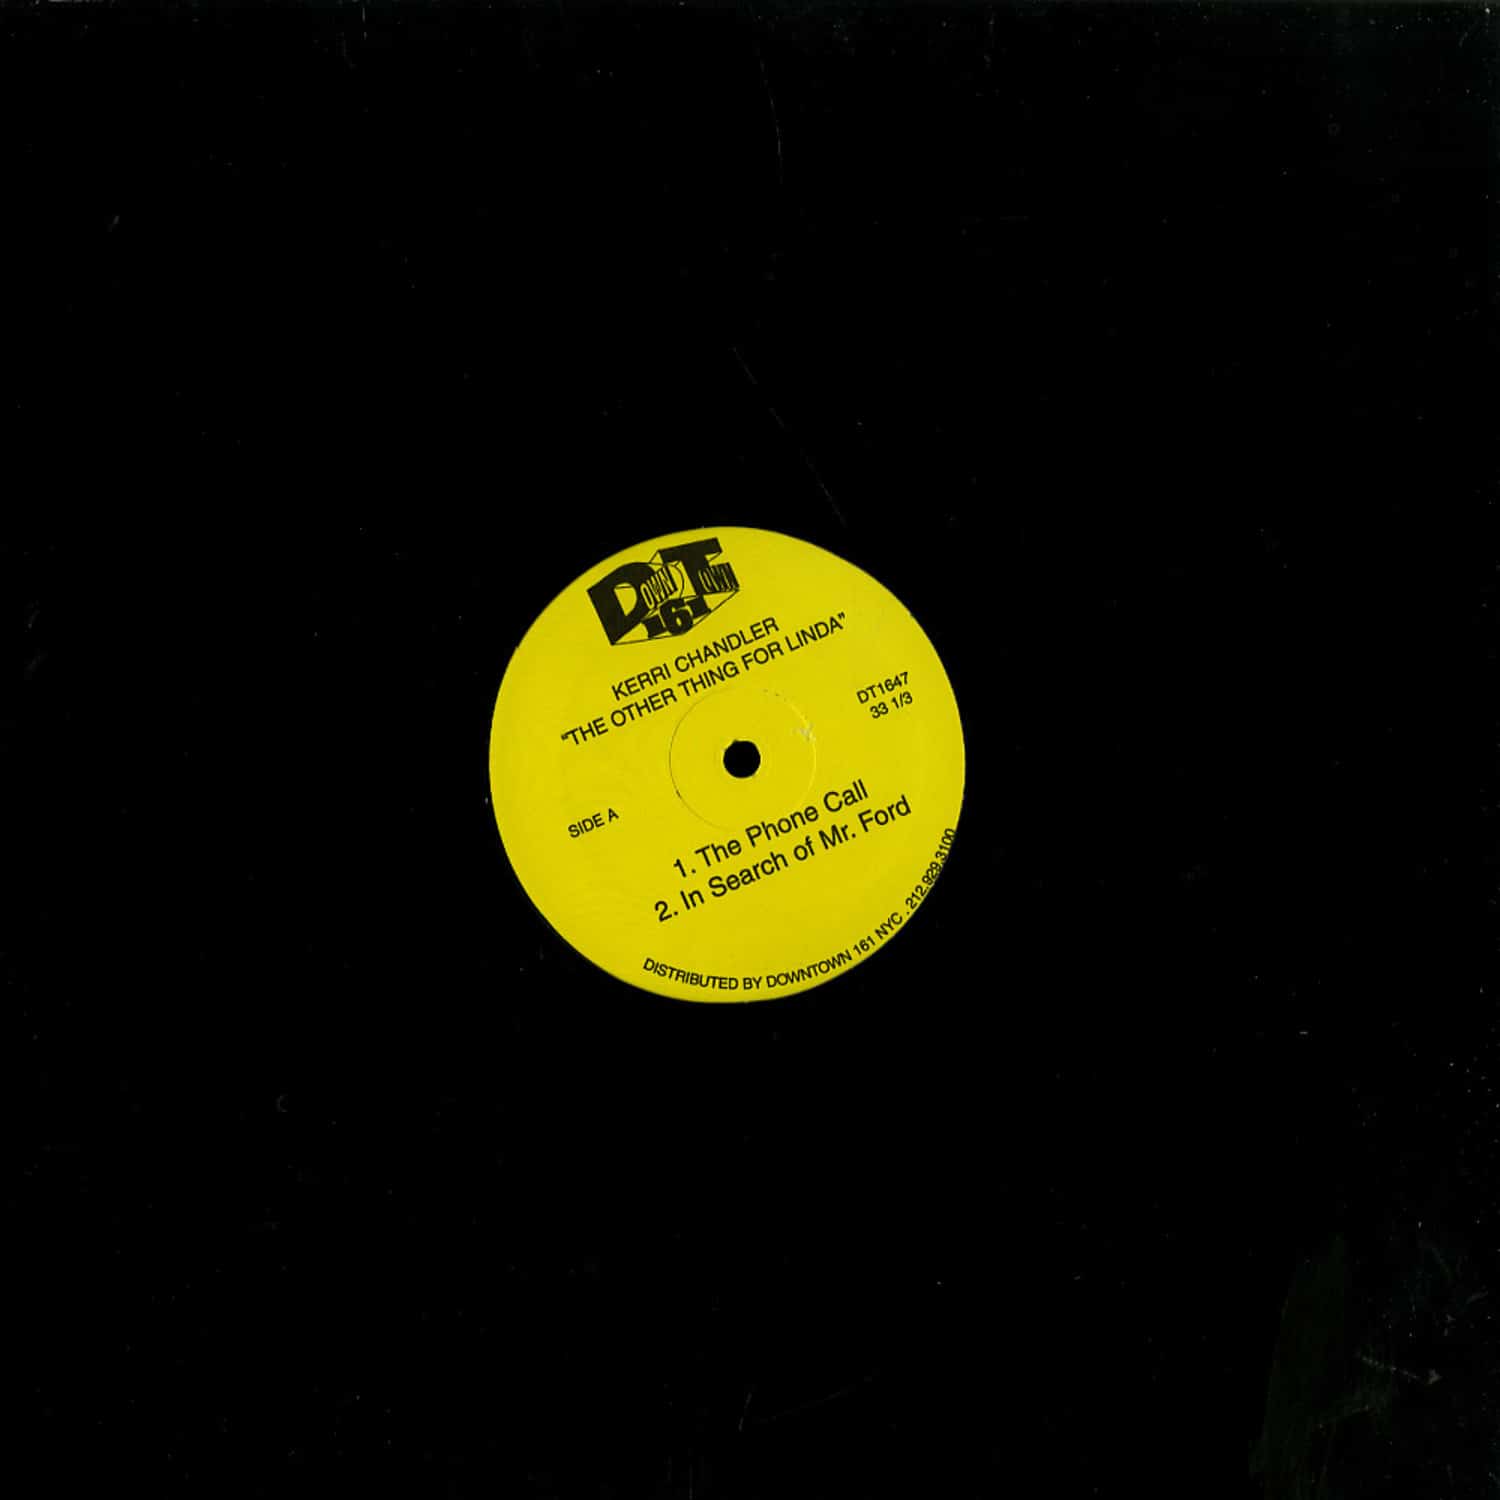 Kerri Chandler - THE OTHER THING FOR LINDA